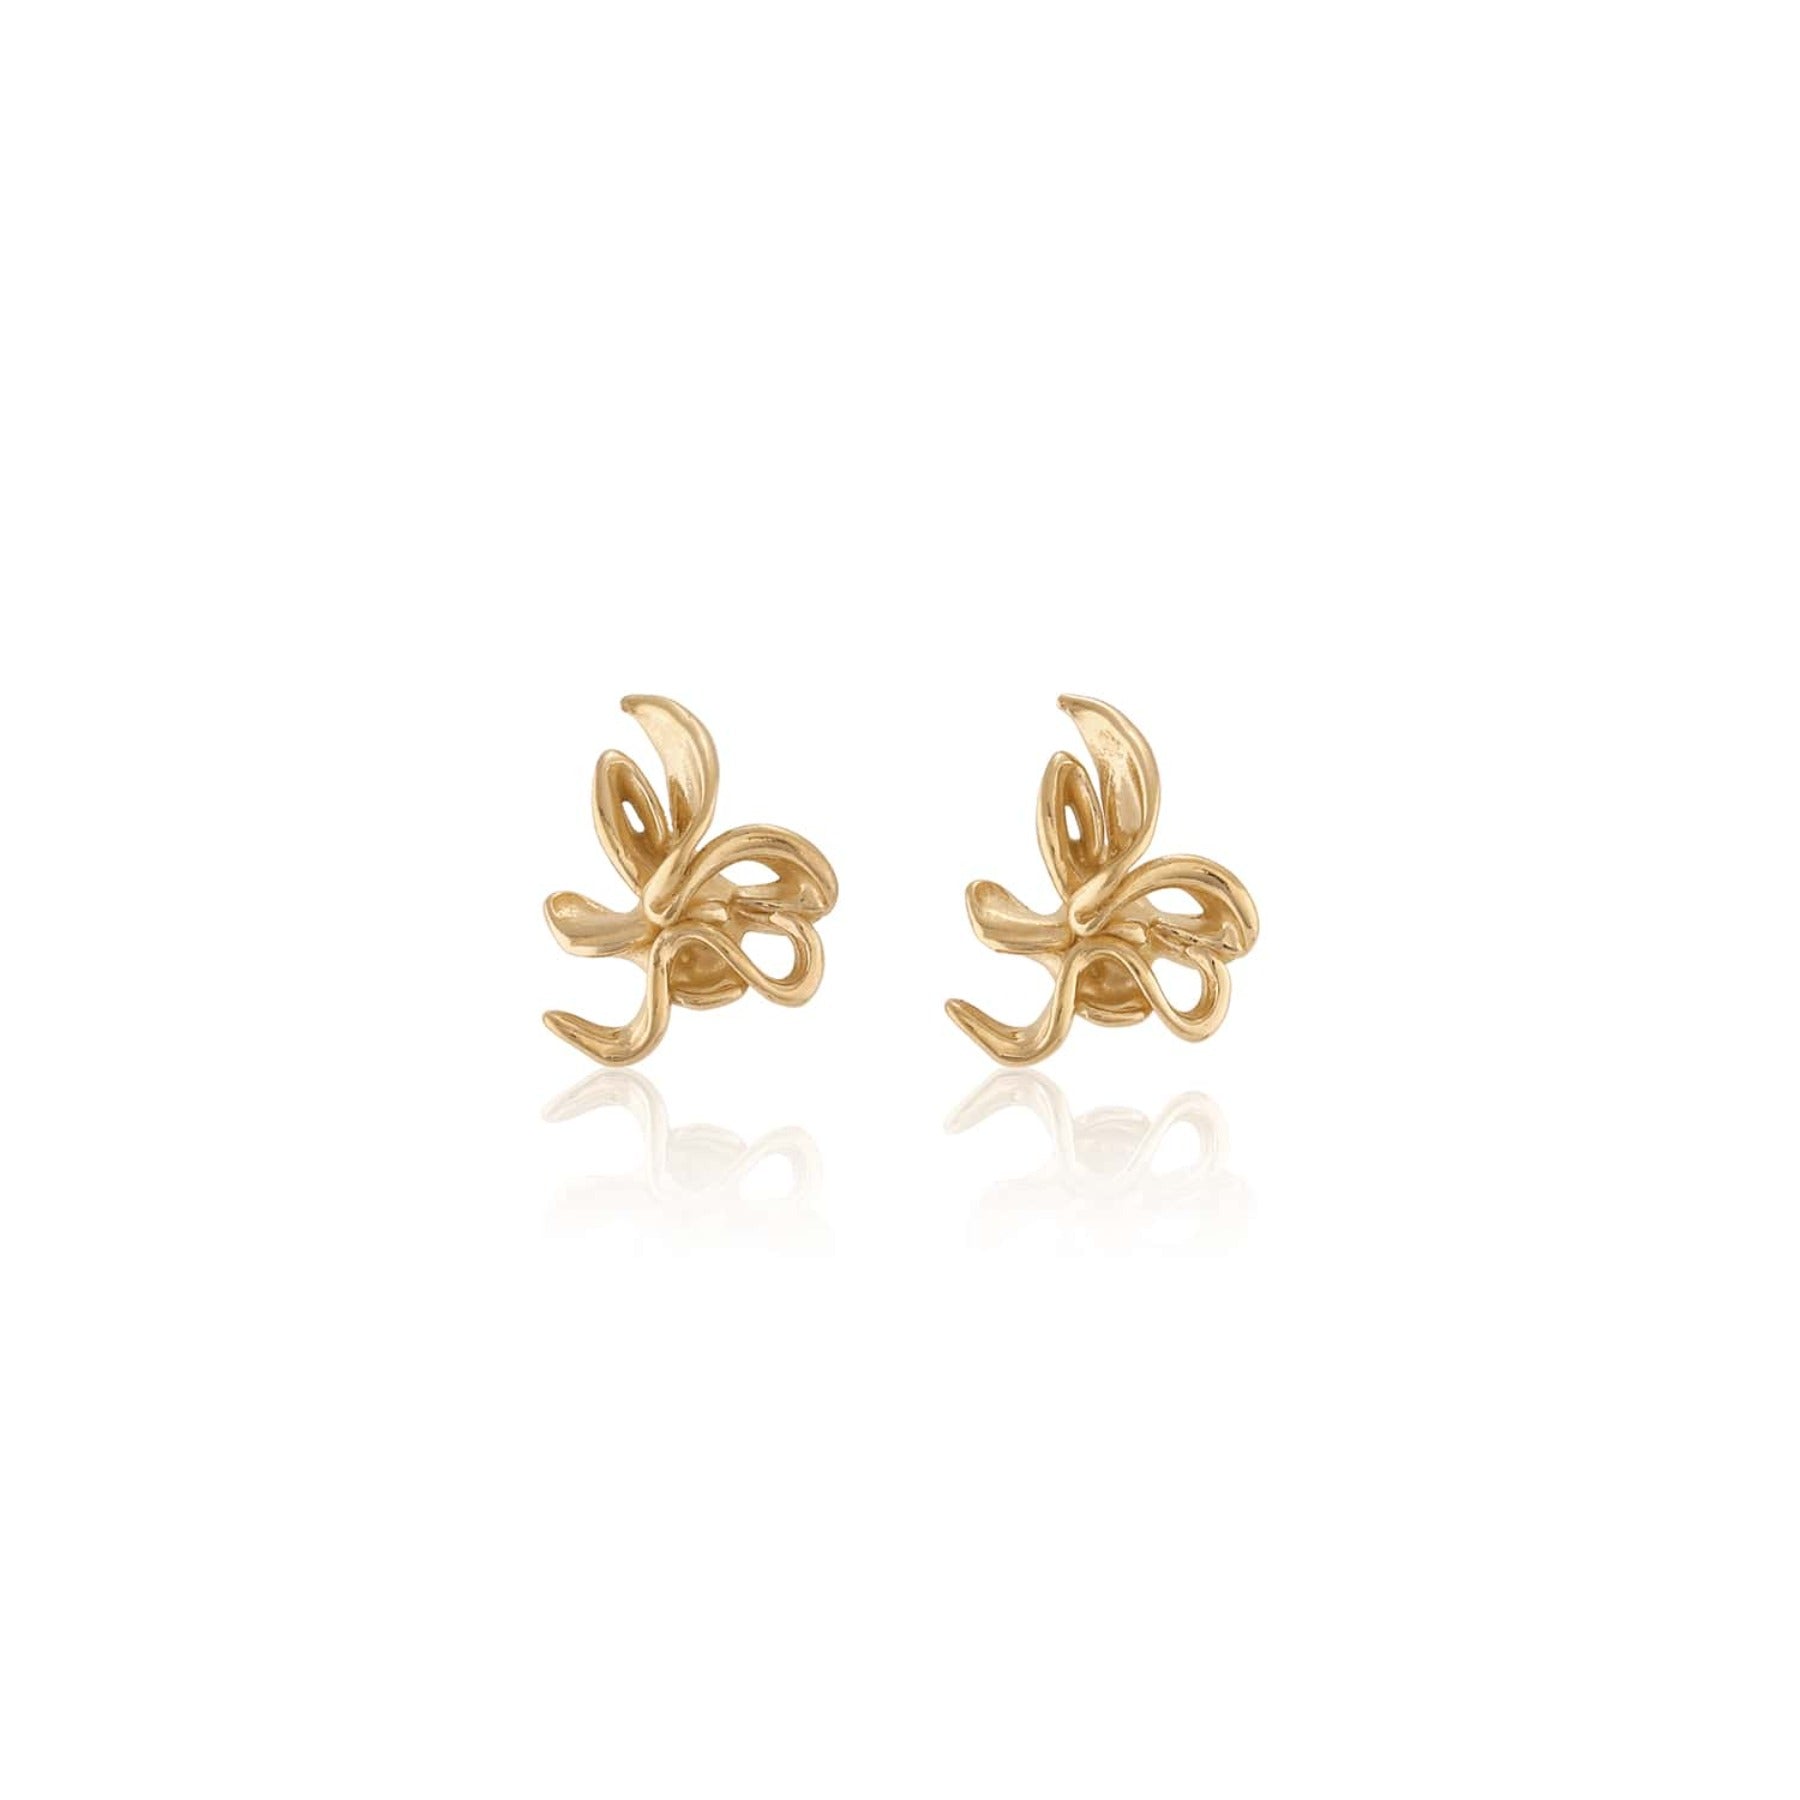 Abstract sculptural lily flower stud earrings in 18k gold vermeil.